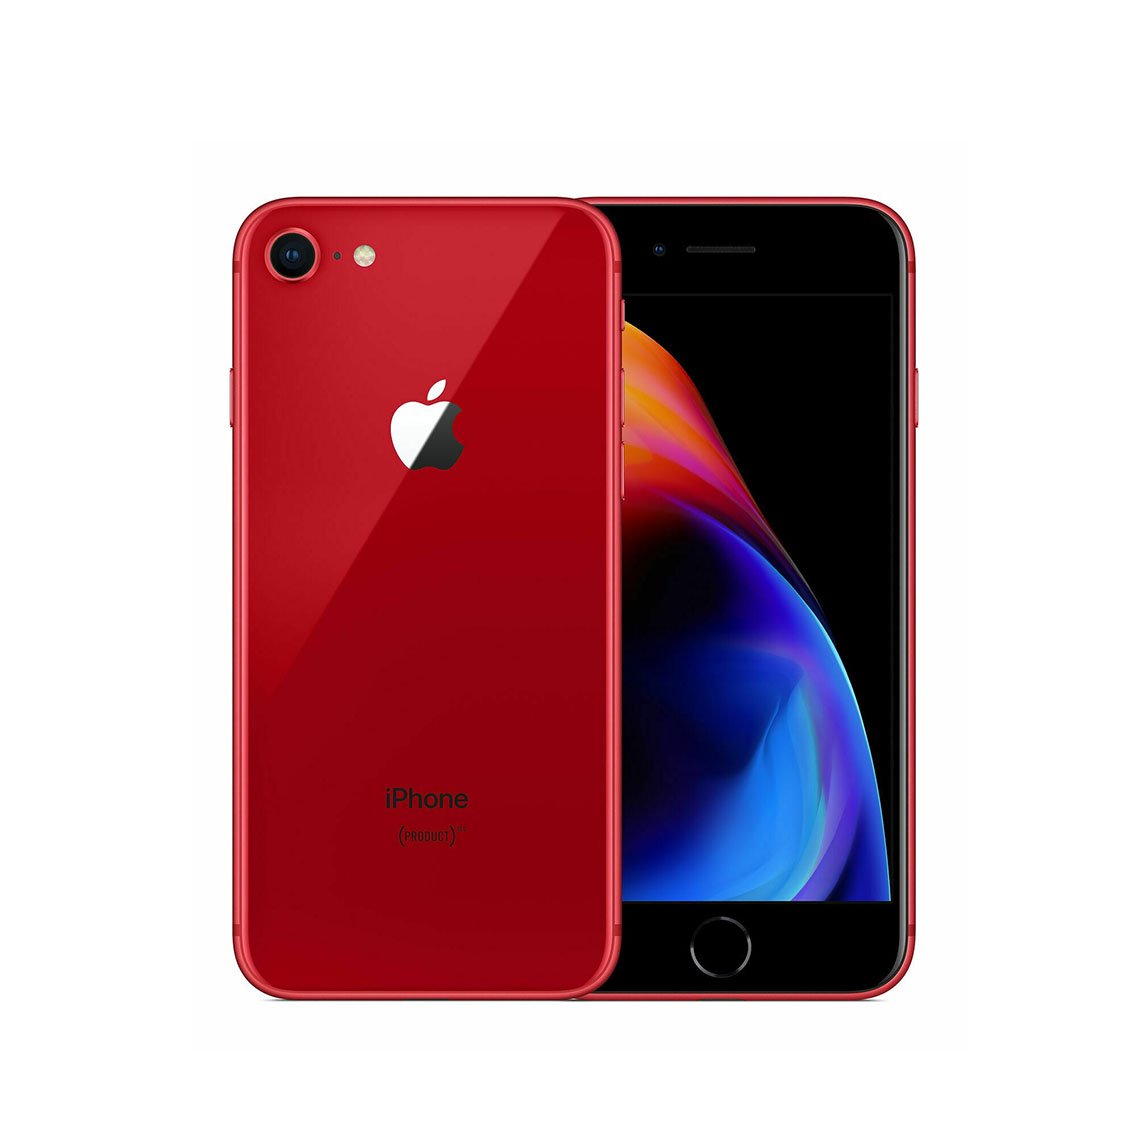 iPhone 8 - (PRODUCT)RED